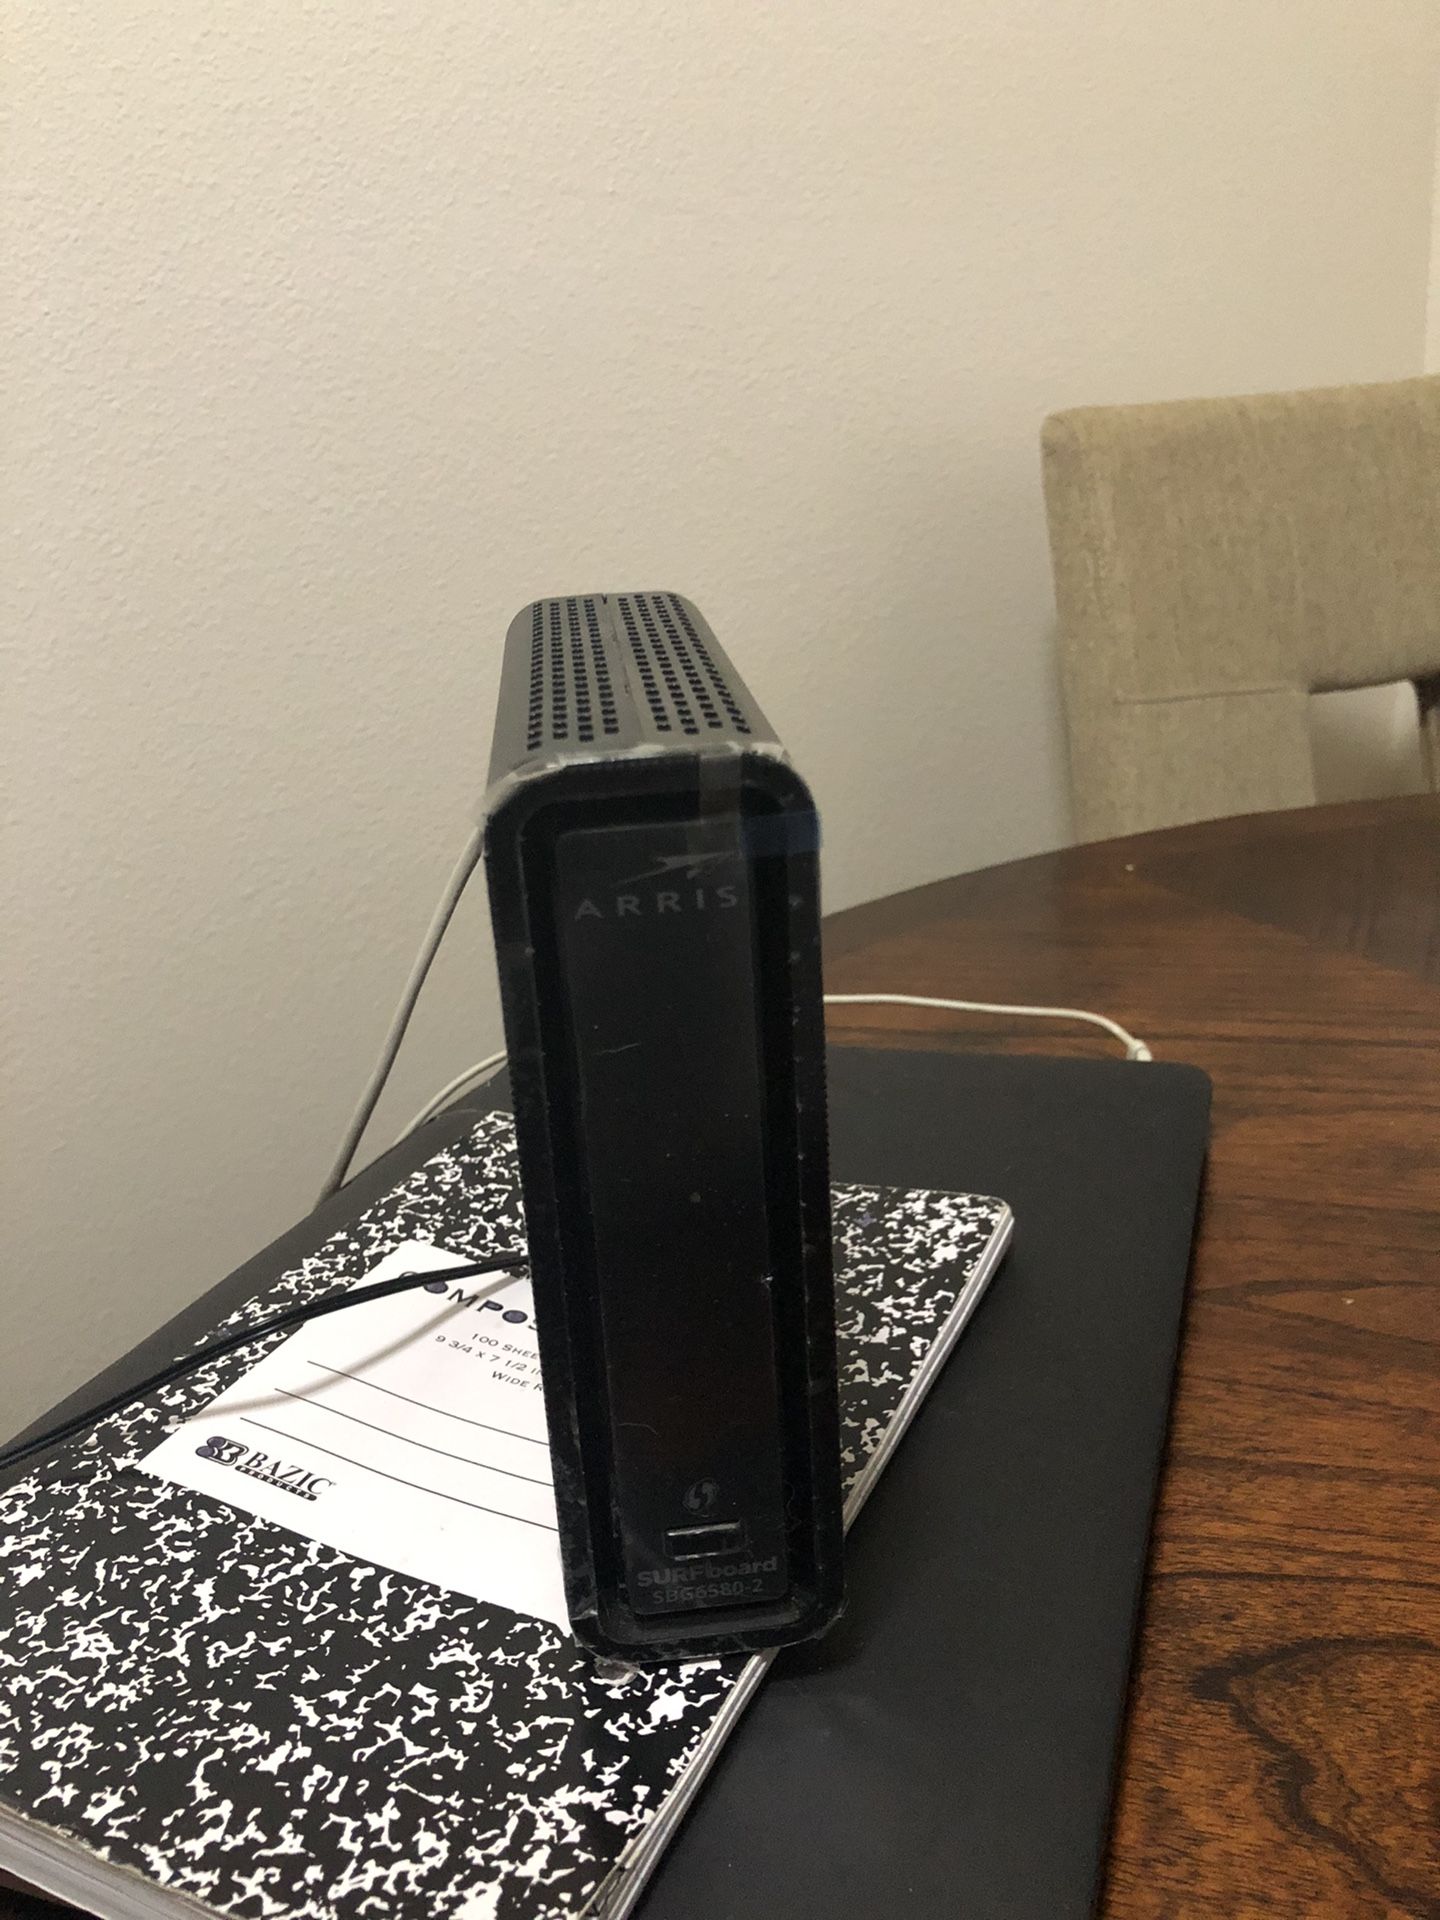 Arris SBG6580-2 cable modem and wireless router